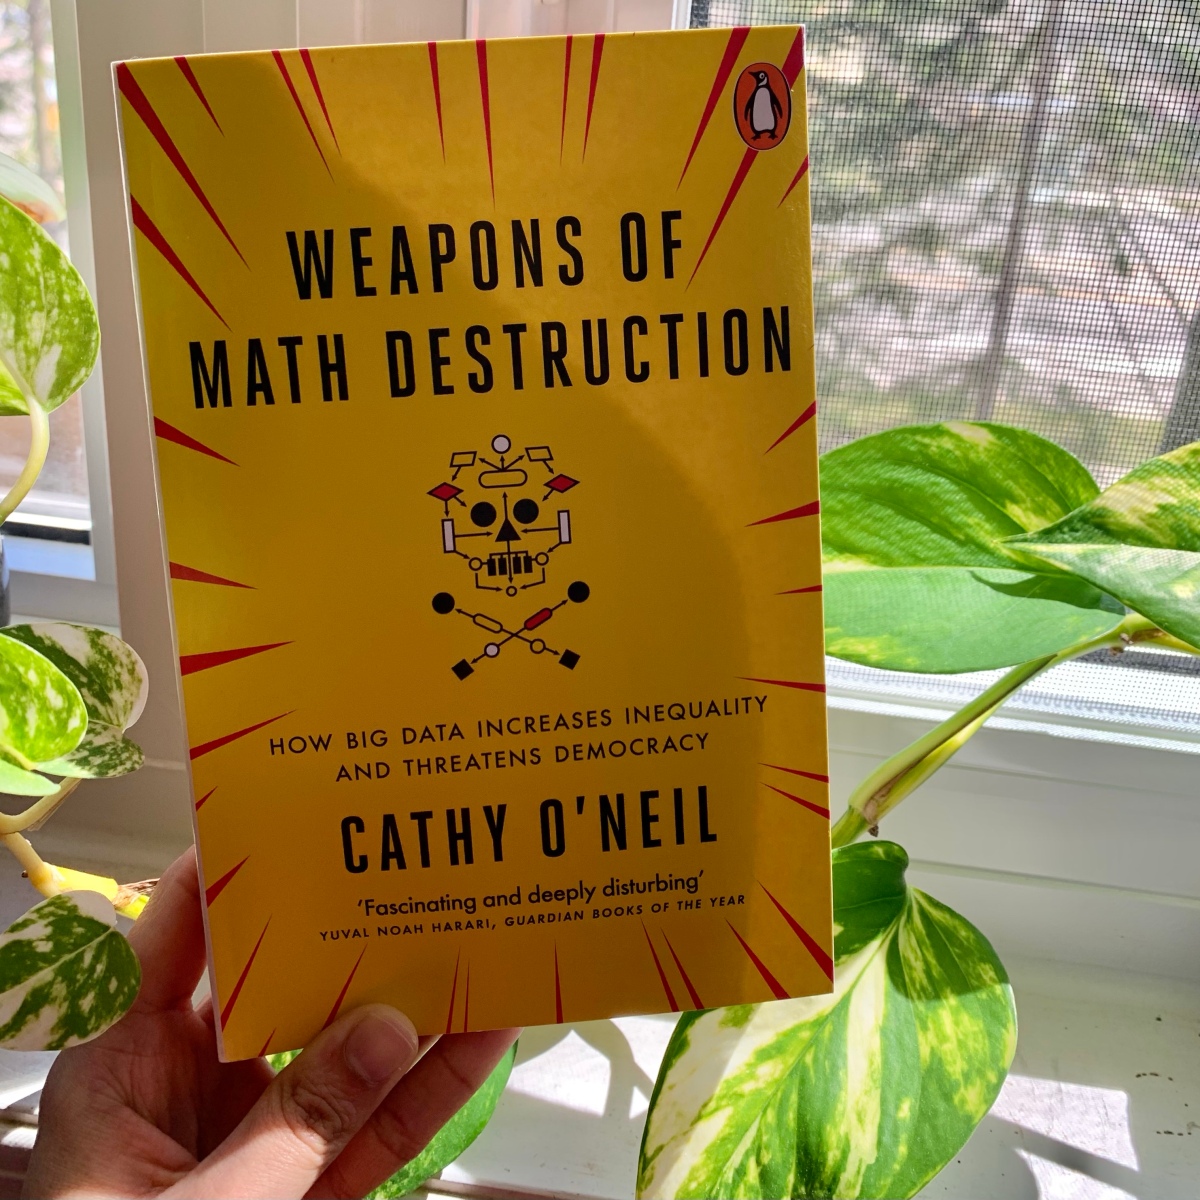 ‘Weapons of Math Destruction’ by Cathy O’Neil